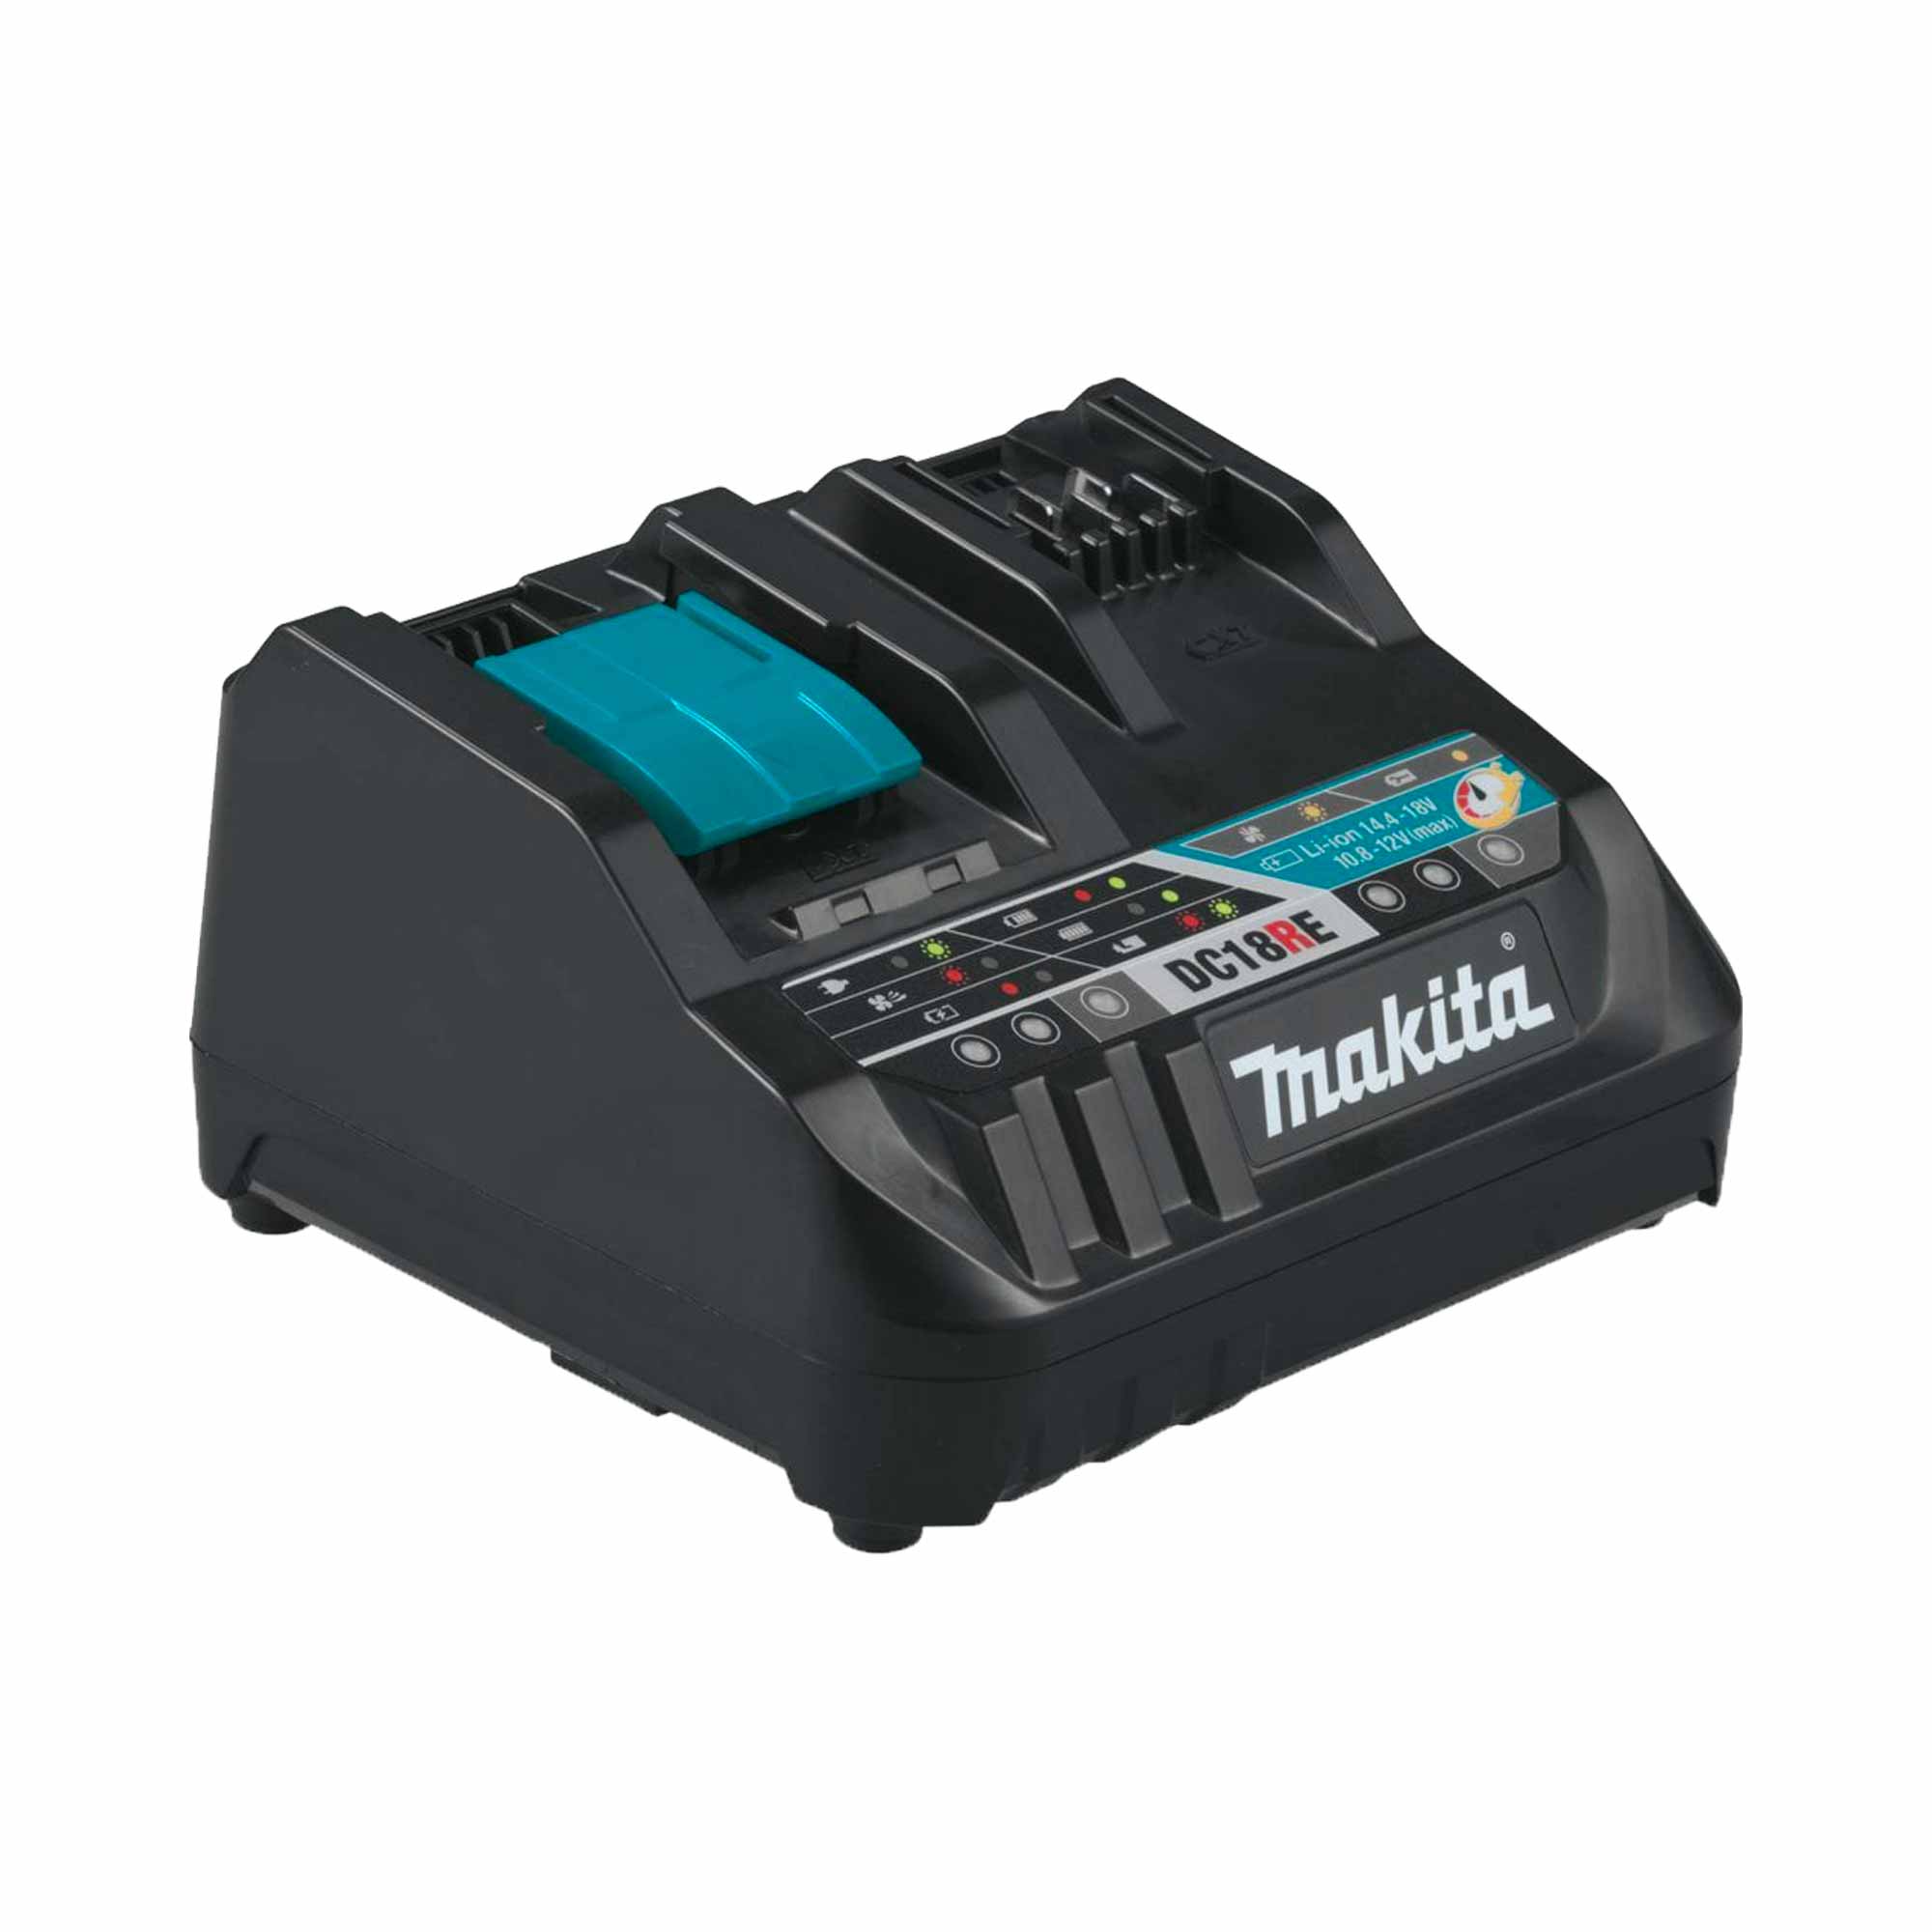 Chargeur universel Makita DC18RE